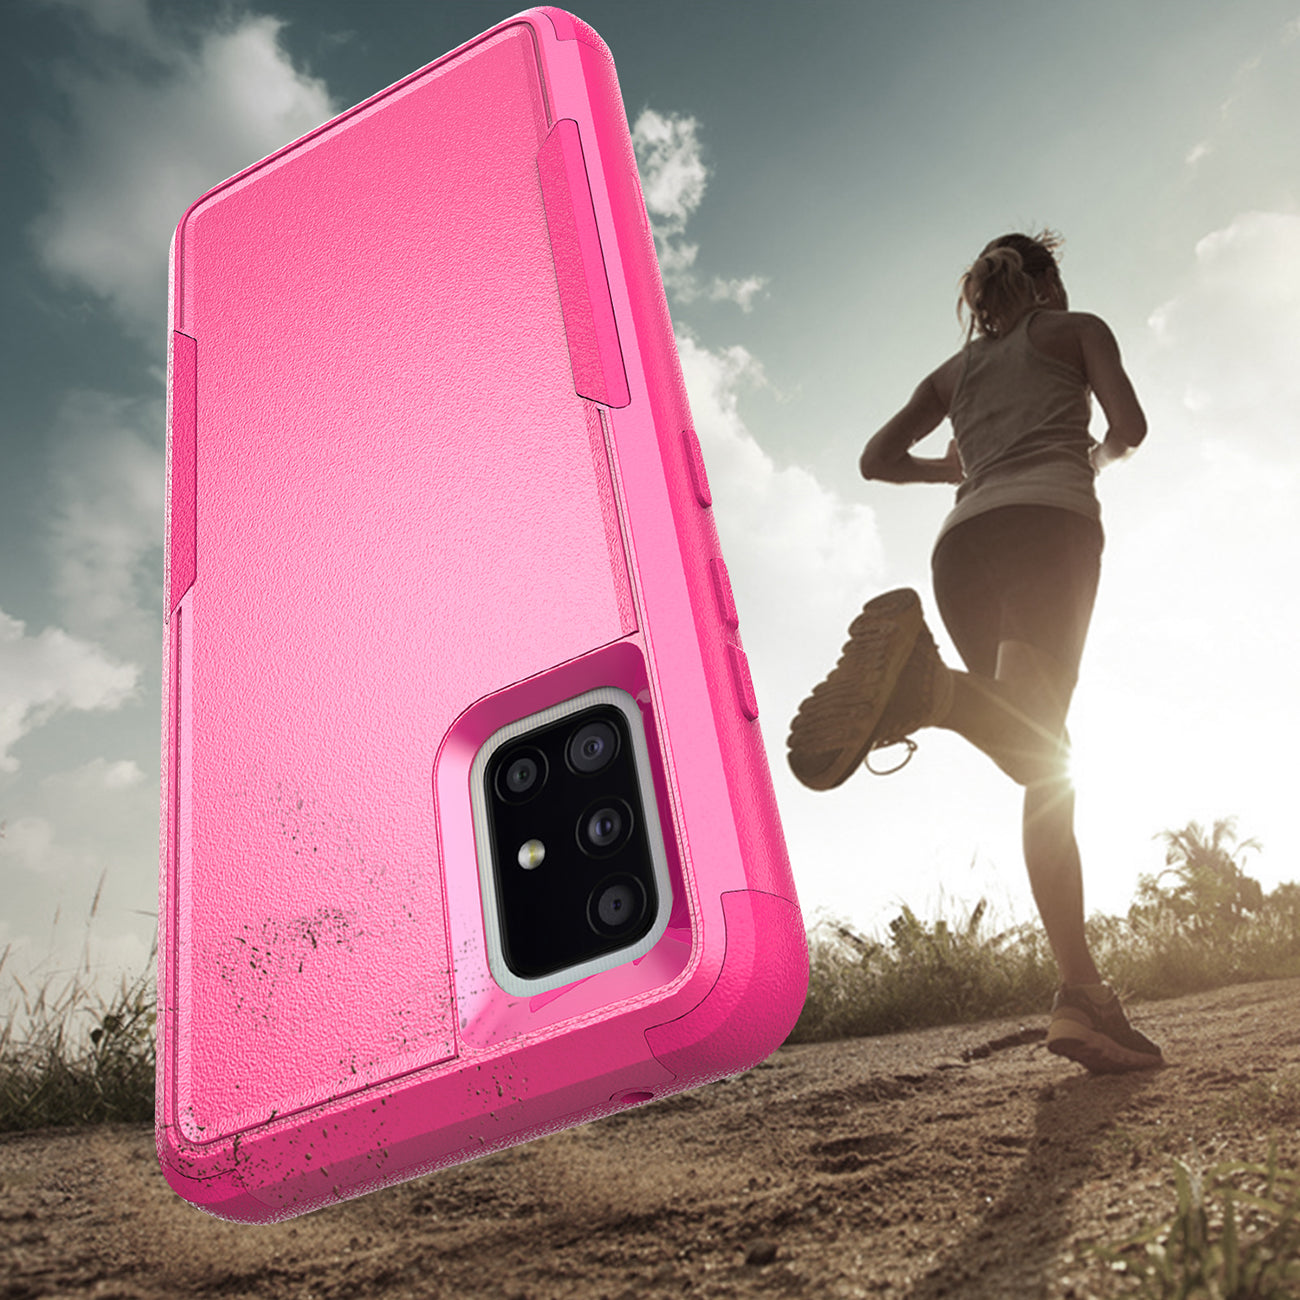 3in1 Hybrid Heavy Duty Defender Rugged Armor Military Grade Protective Case For SAMSUNG GALAXY A51 5G In Hot pink